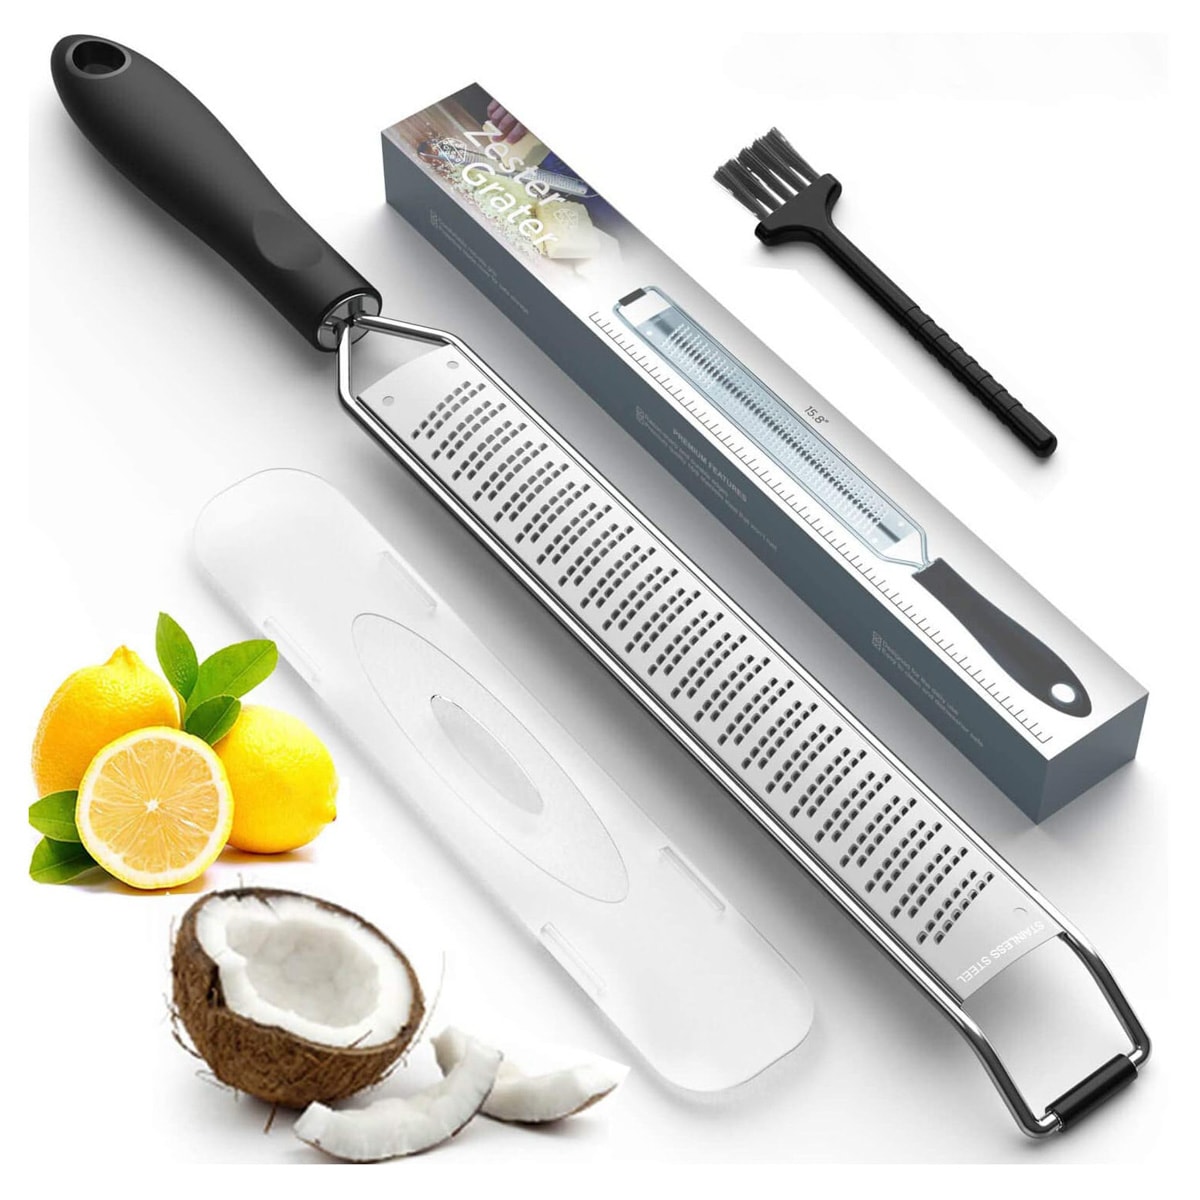 A zester outside of the box next to a picture of lemons and a cut-up coconut.